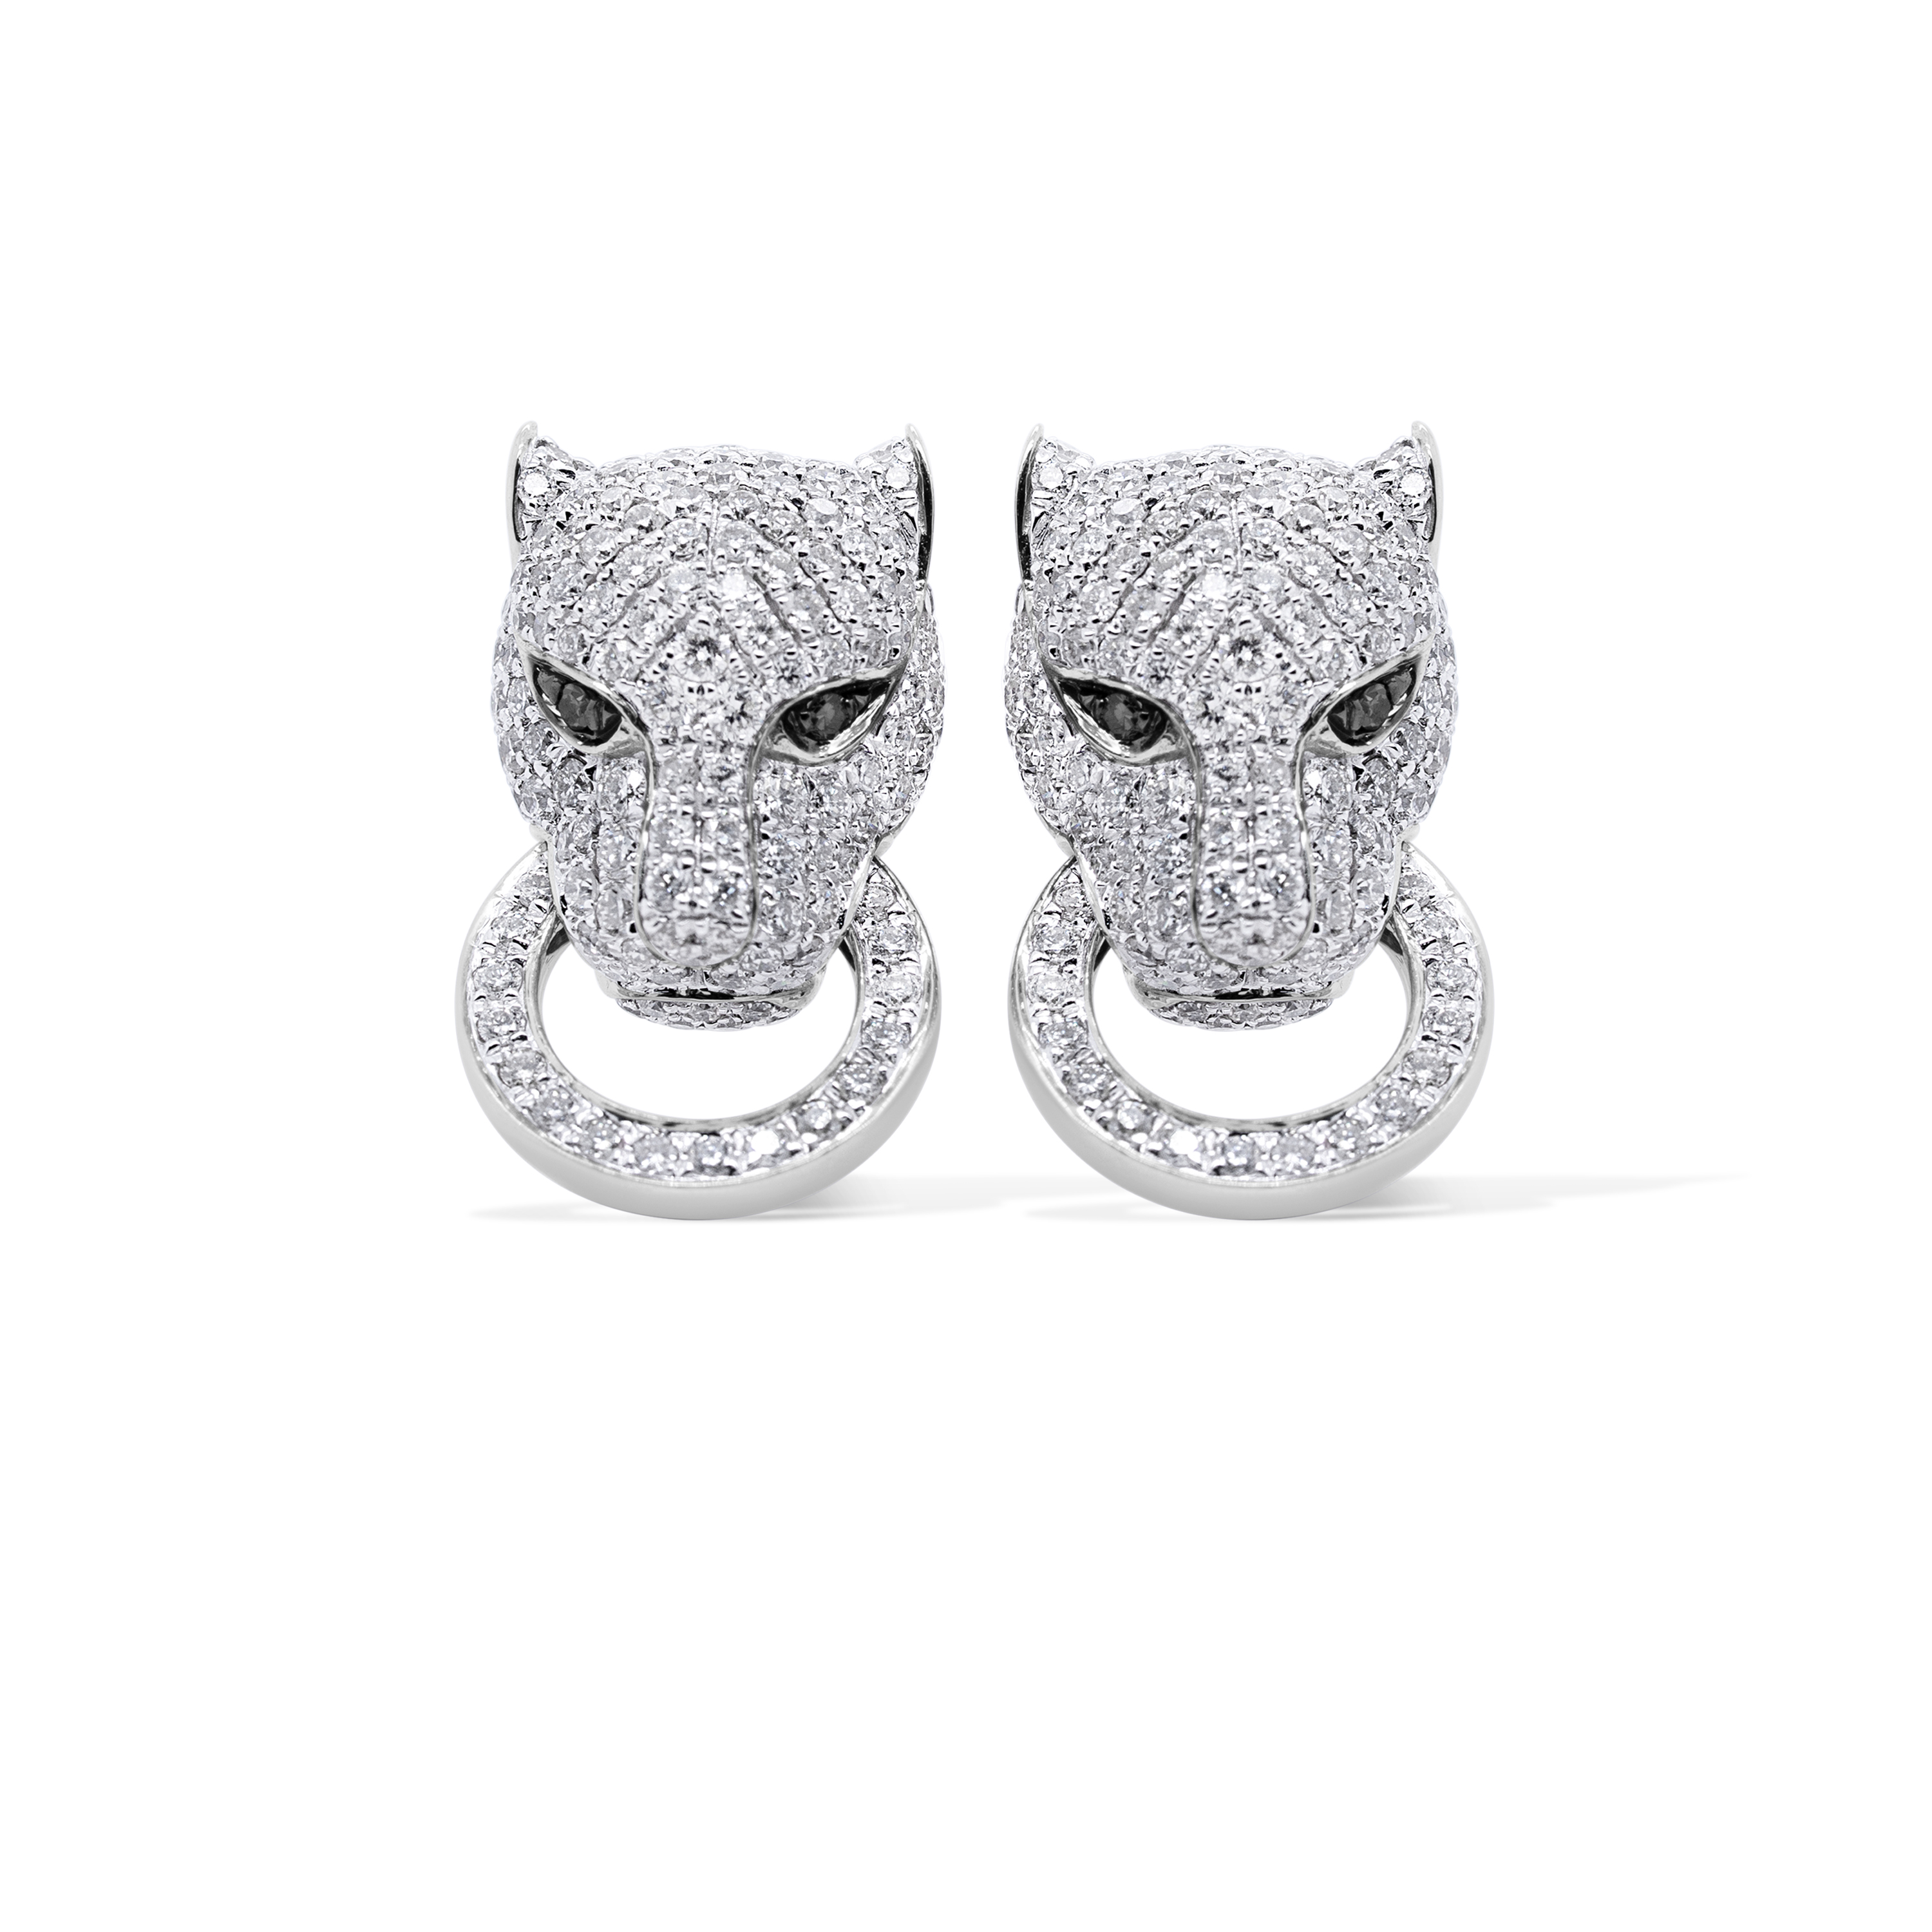 Diamond Panther Earrings 1.55 ct. 14K White Gold